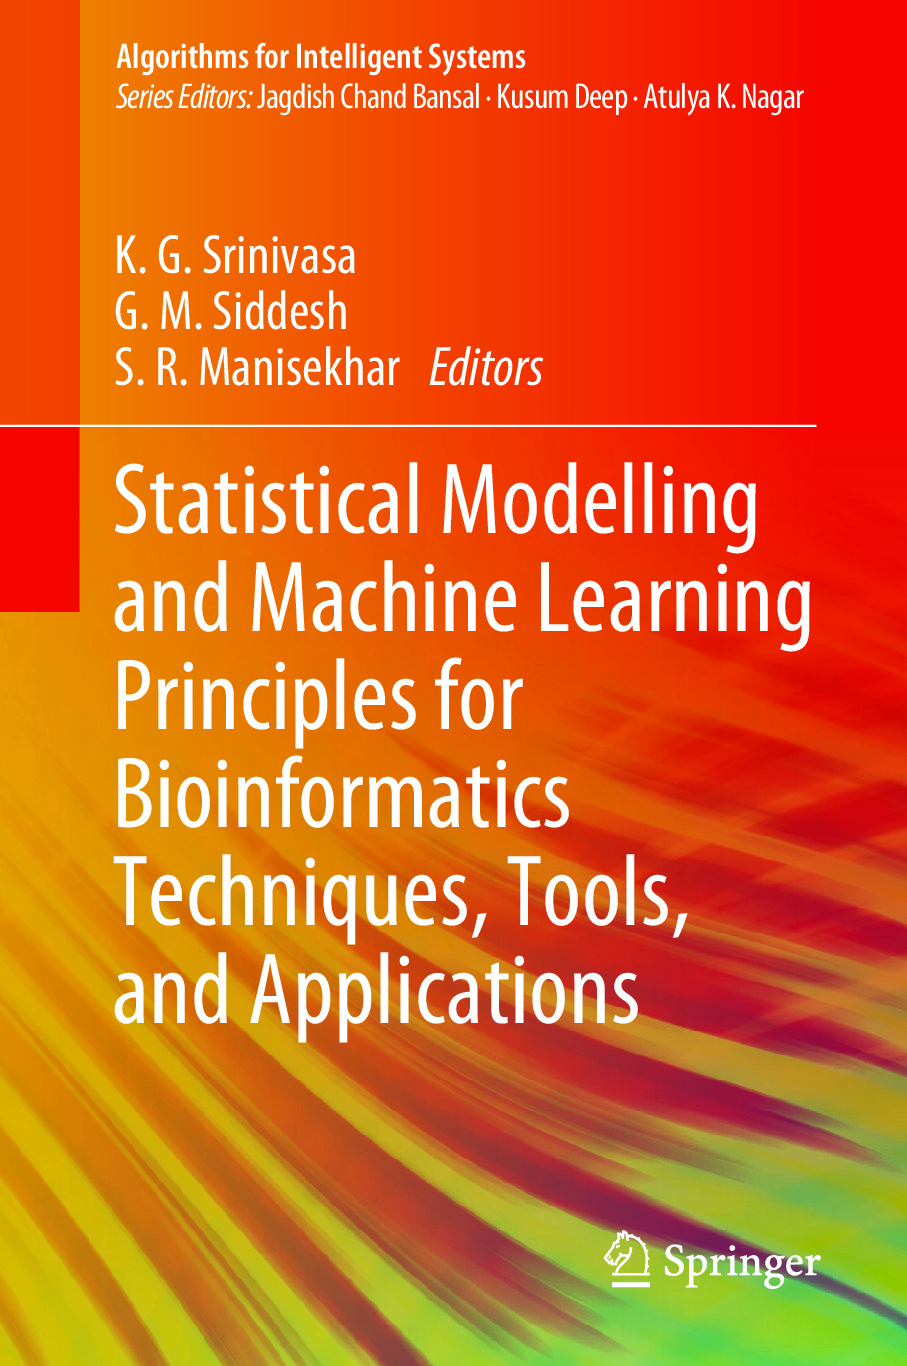 Statistical Modelling and Machine Learning Principles for Bioinformatics Techniques, Tools, and Applications. Algorithms for Intelligent Systems